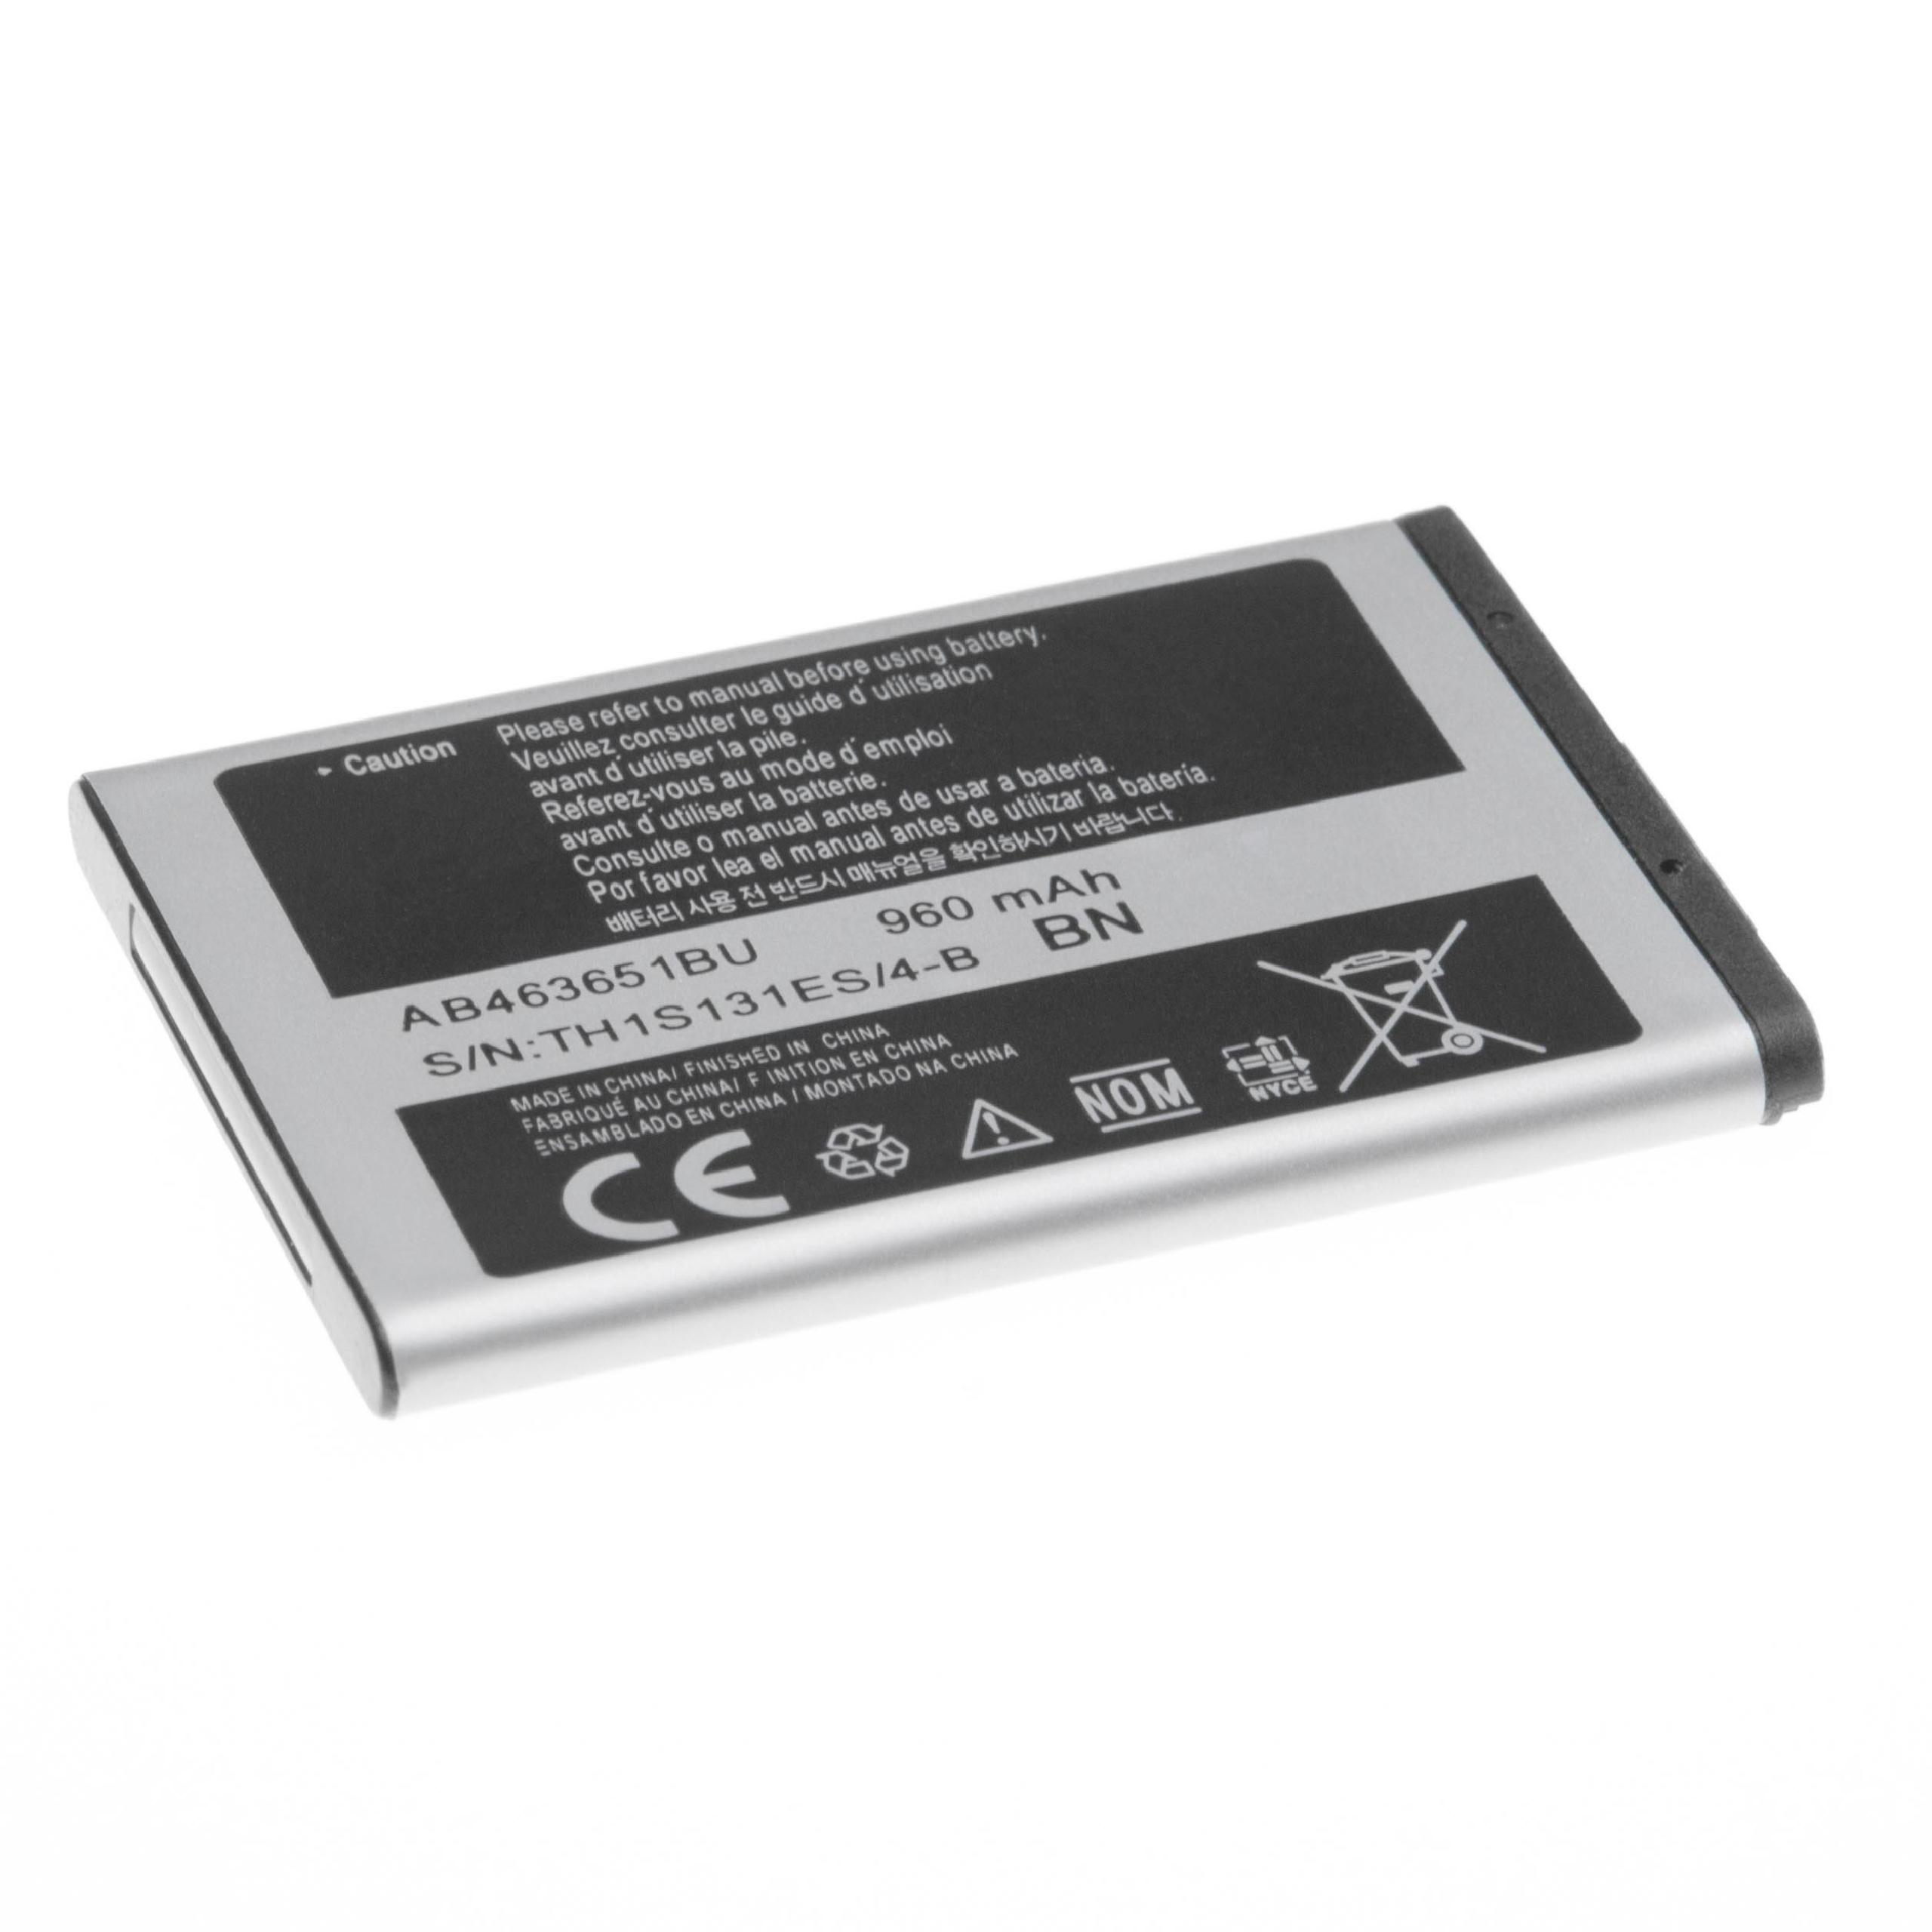 Mobile Phone Battery Replacement for Samsung AB463651BABSTD, AB463651BA, AB463651BC - 950mAh 3.7V Li-Ion